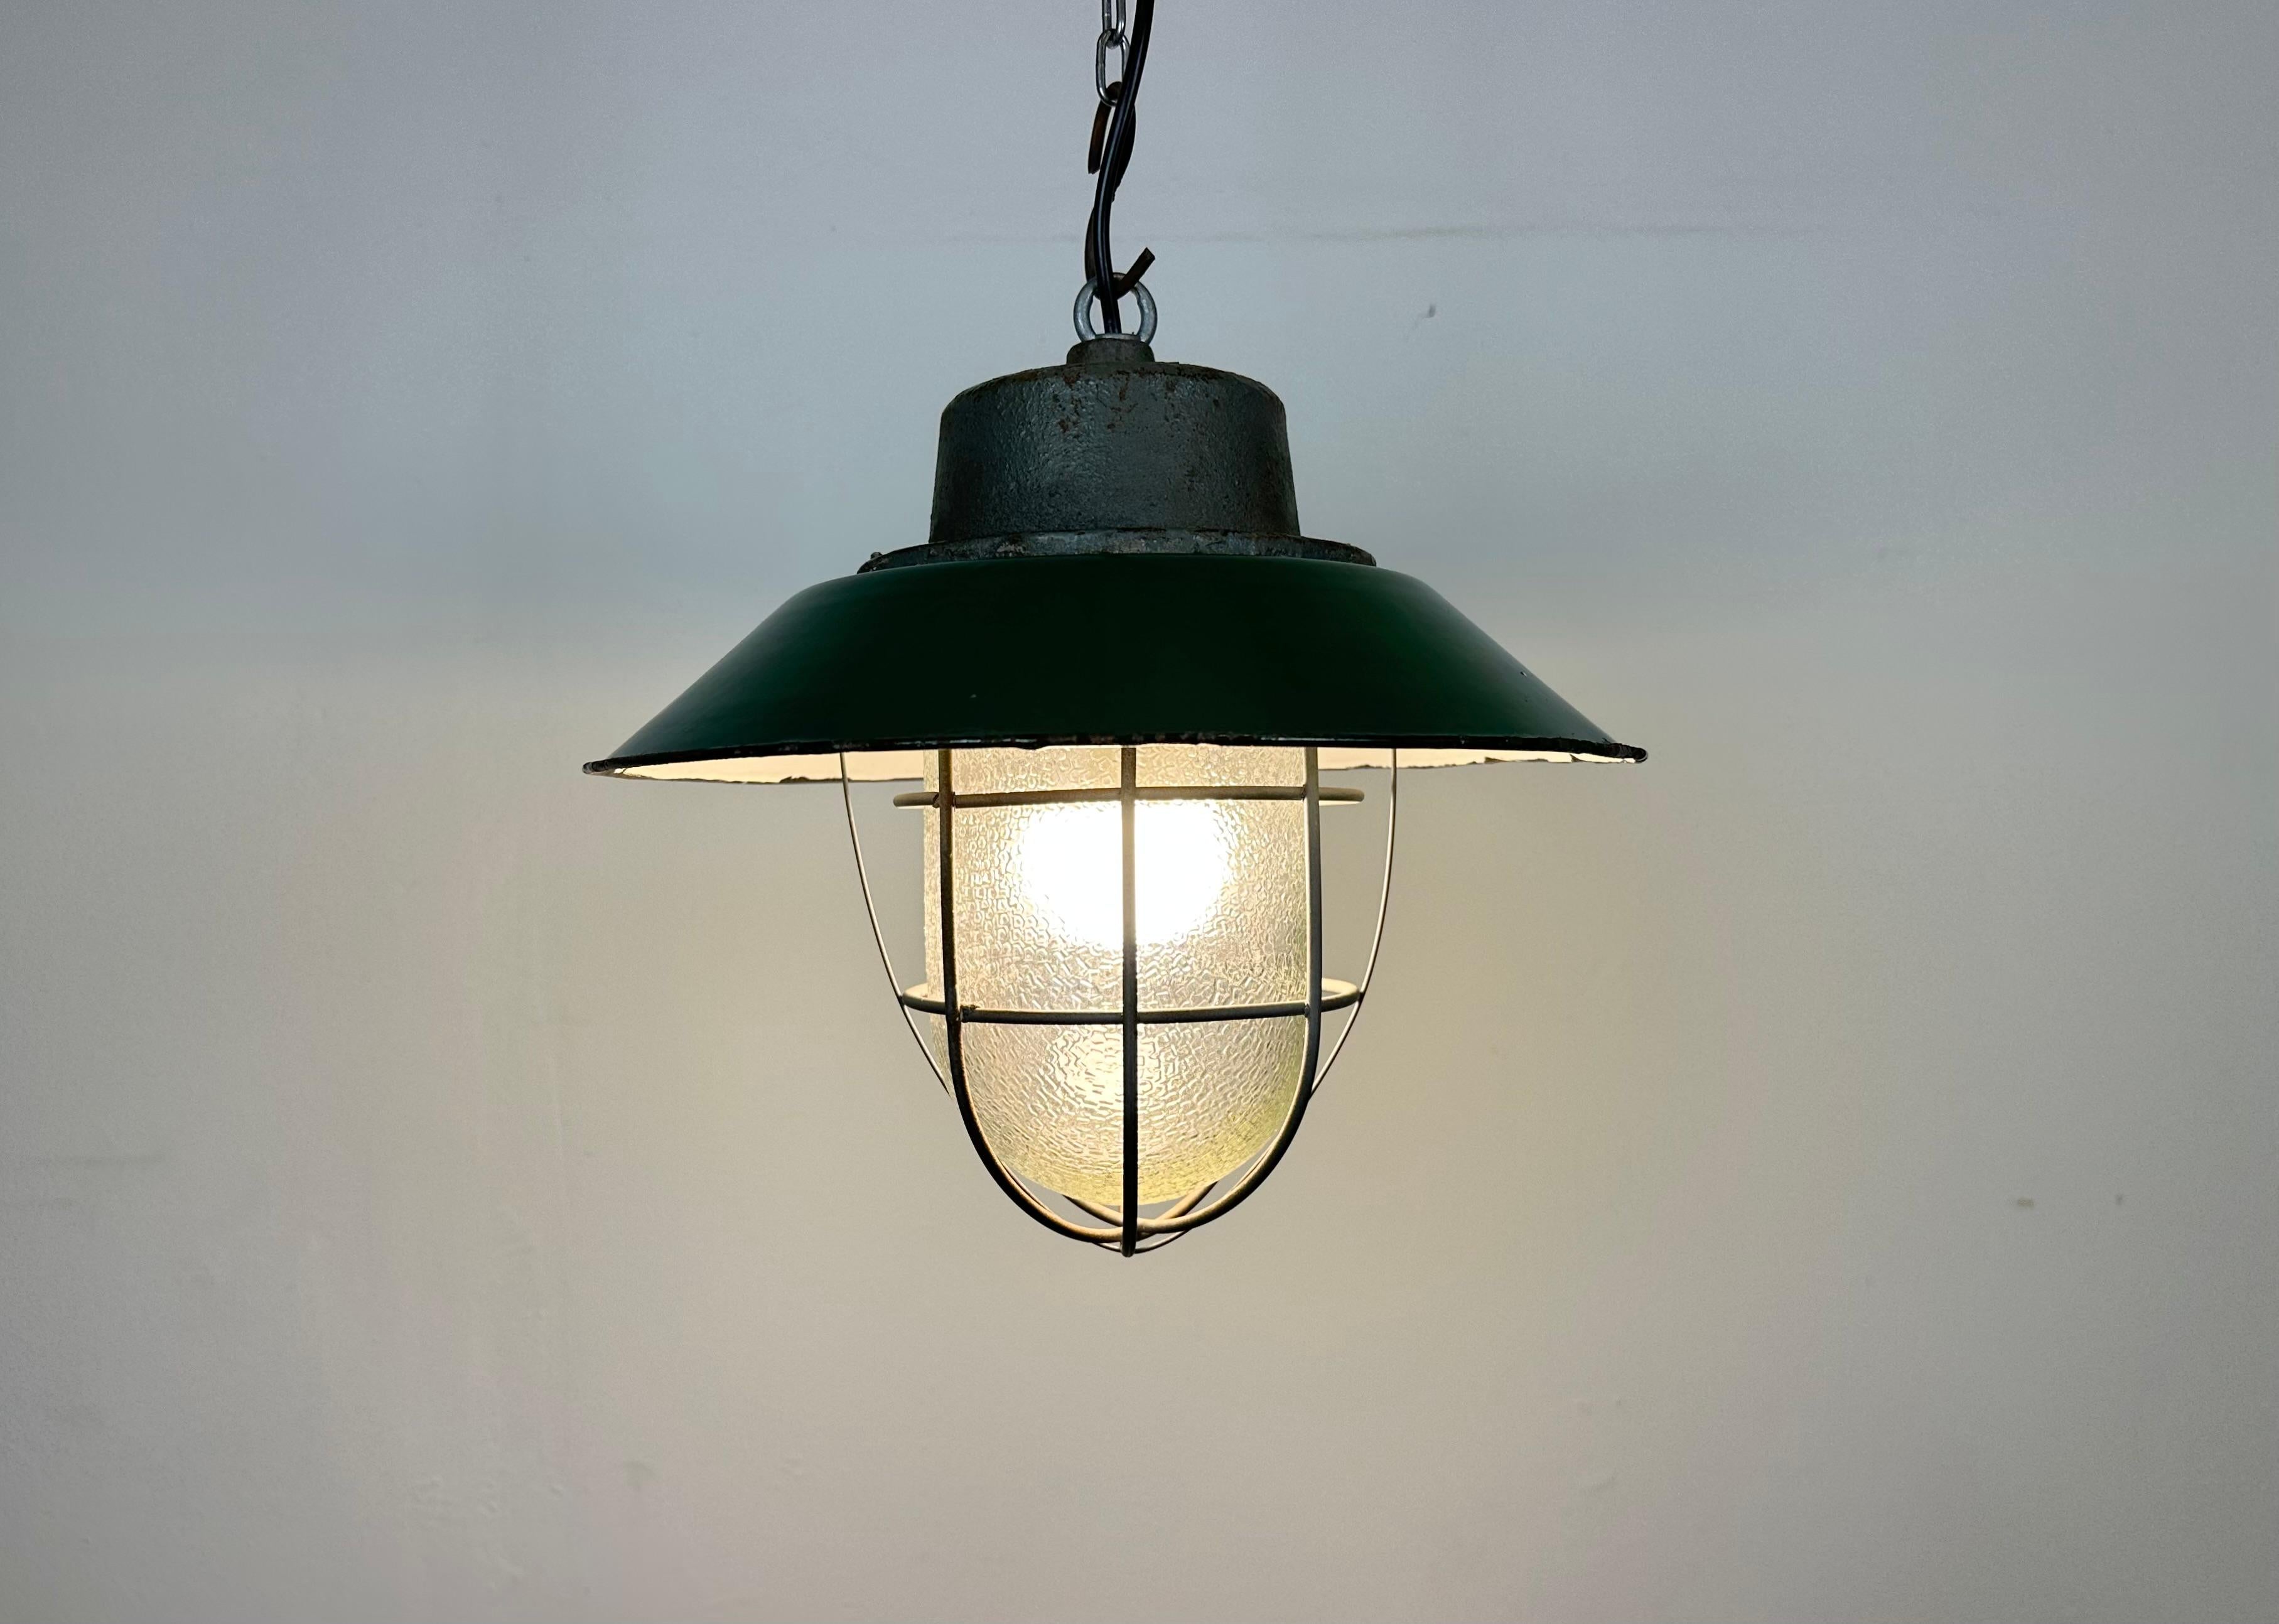 Green Enamel and Cast Iron Industrial Cage Pendant Light, 1960s For Sale 4